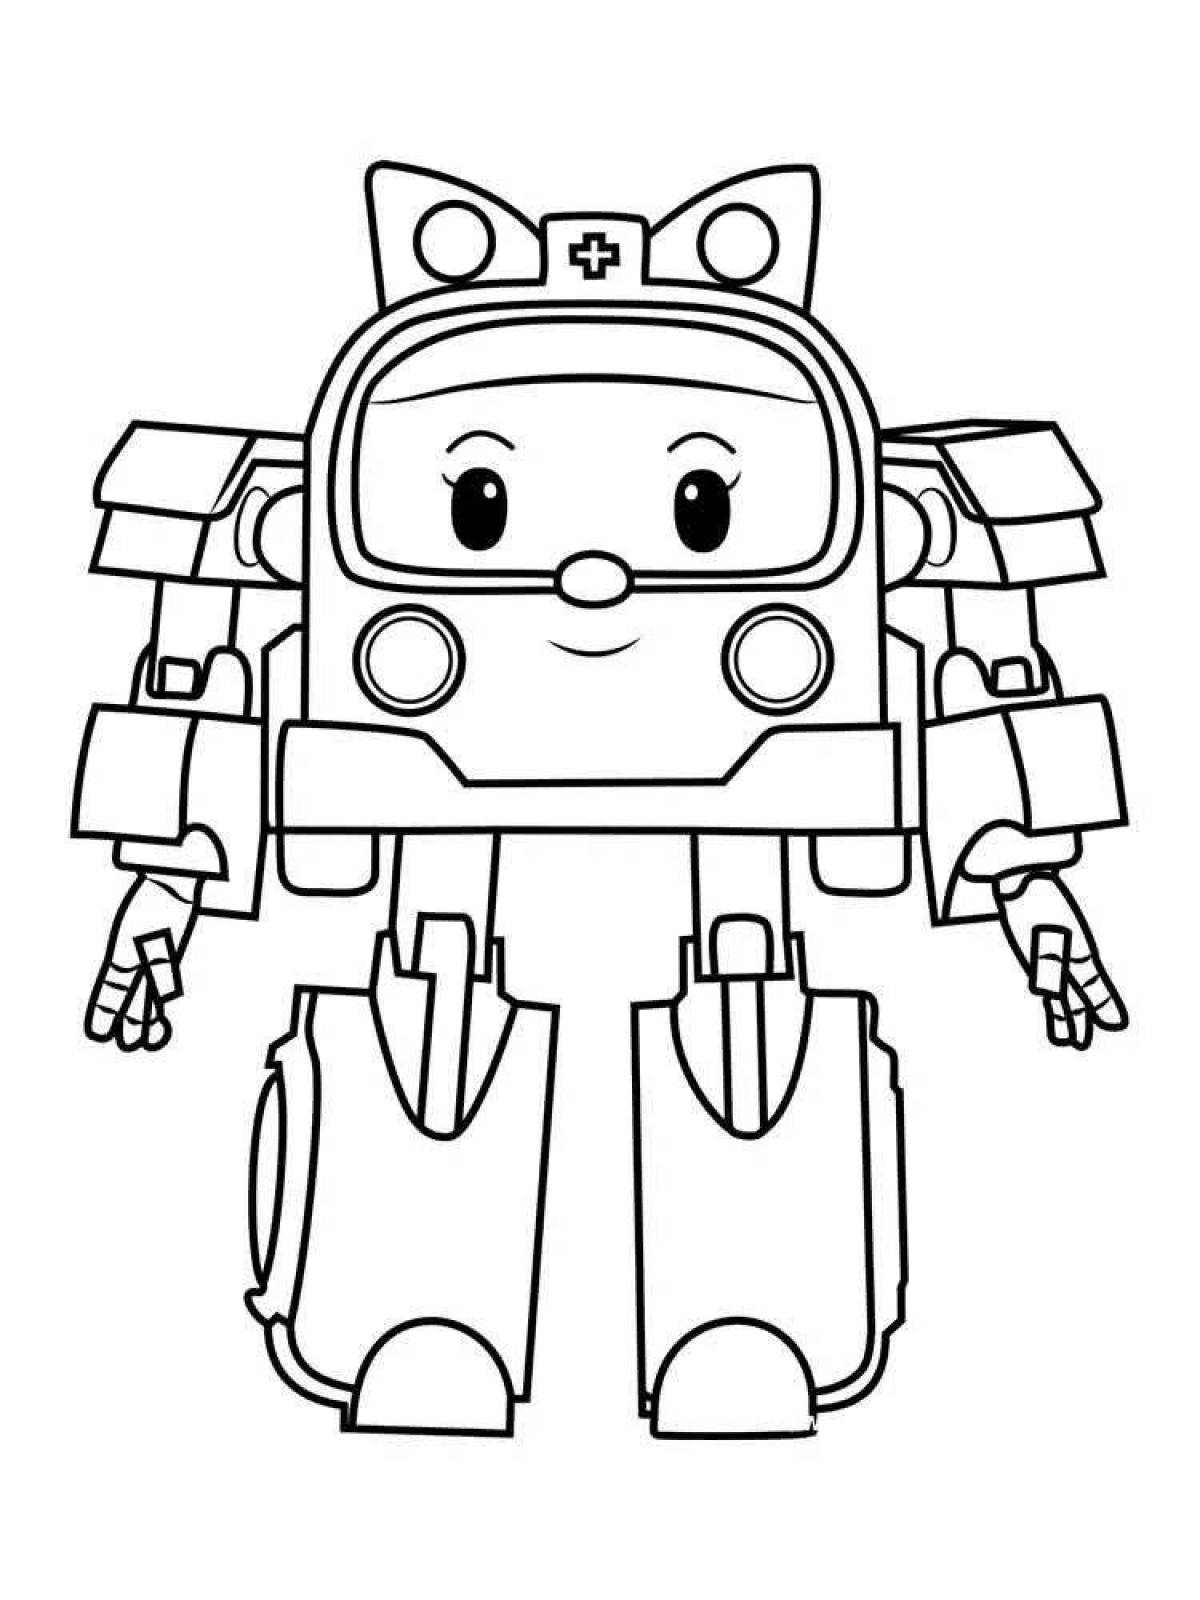 Amber robocar poly awesome coloring book